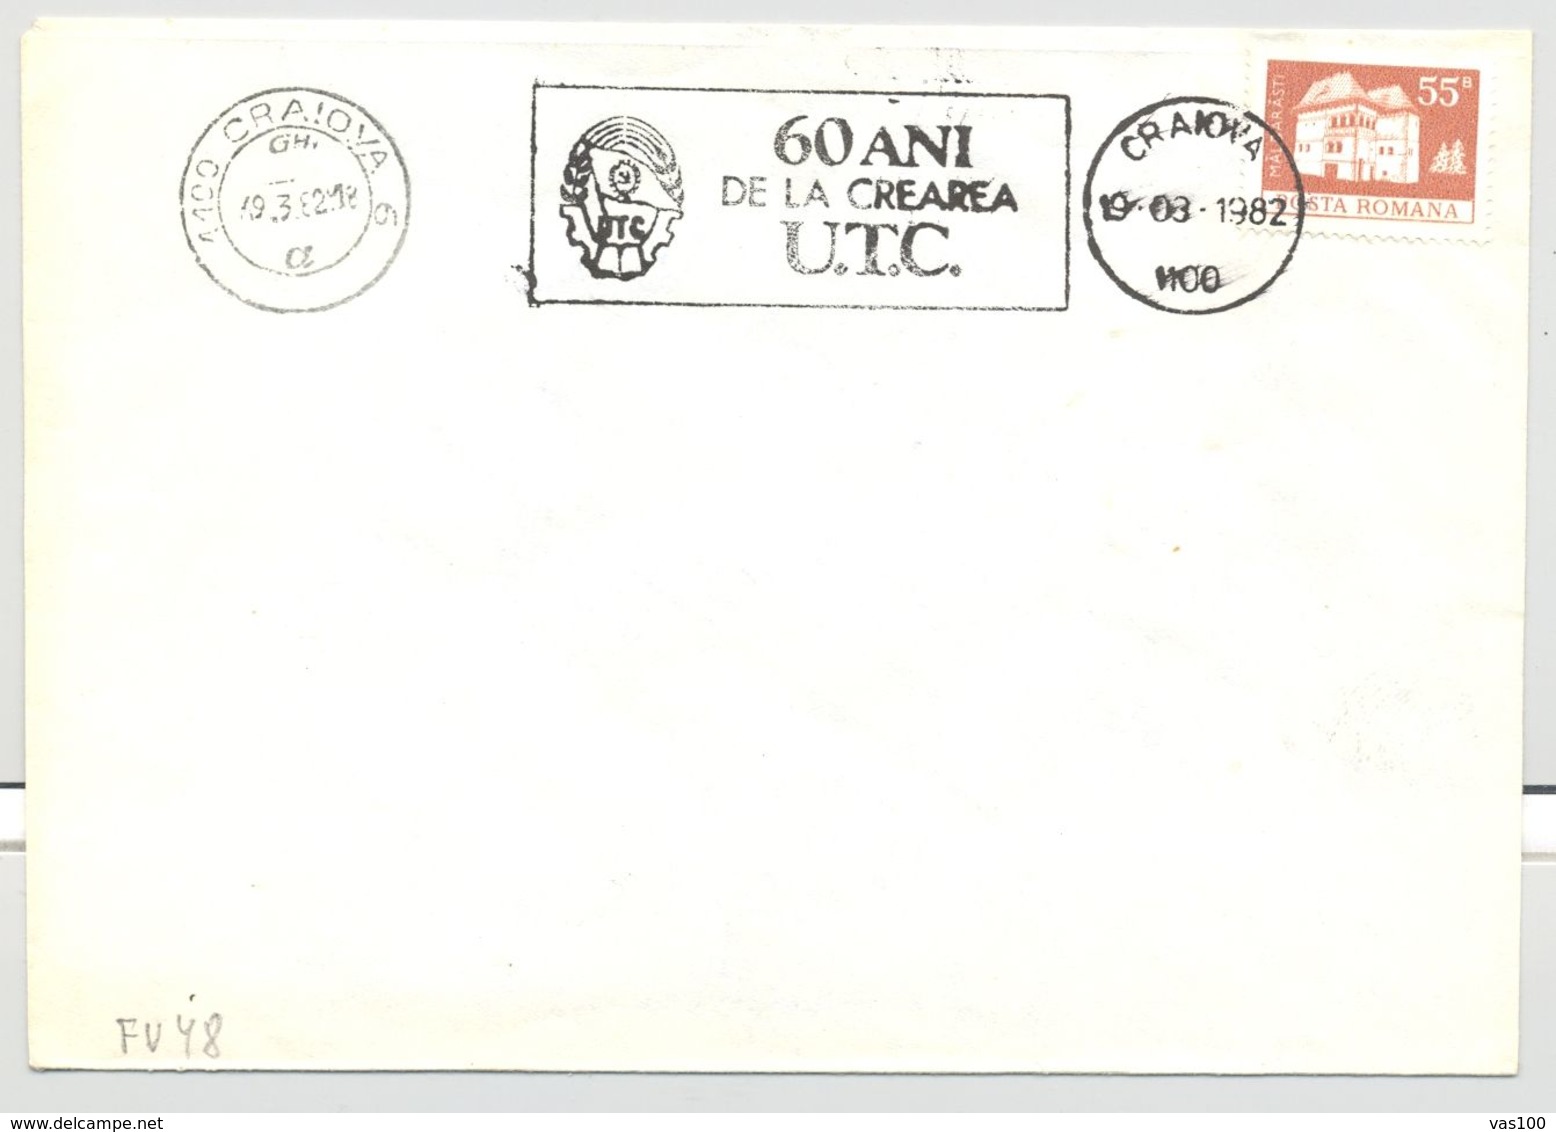 YOUTH COMMUNIST ORGANIZATION, SPECIAL POSTMARK, MANSION STAMP ON COVER, 1982, ROMANIA - Cartas & Documentos